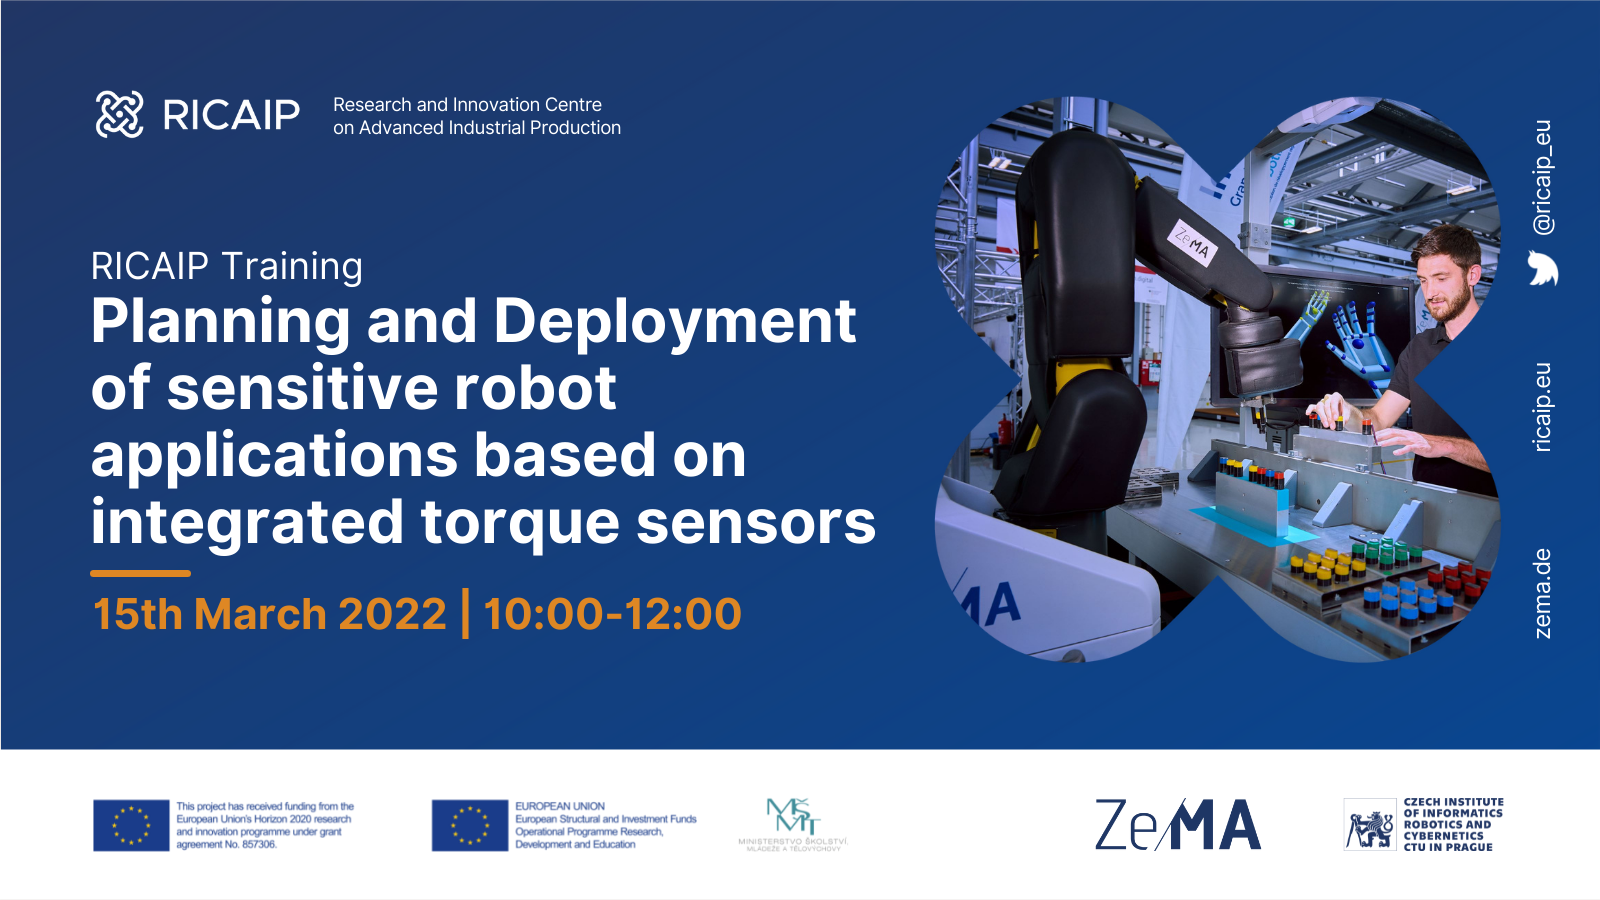 RICAIP Training: Planning & Deployment of Sensitive Robot Applications Based on Integrated Torque Sensors